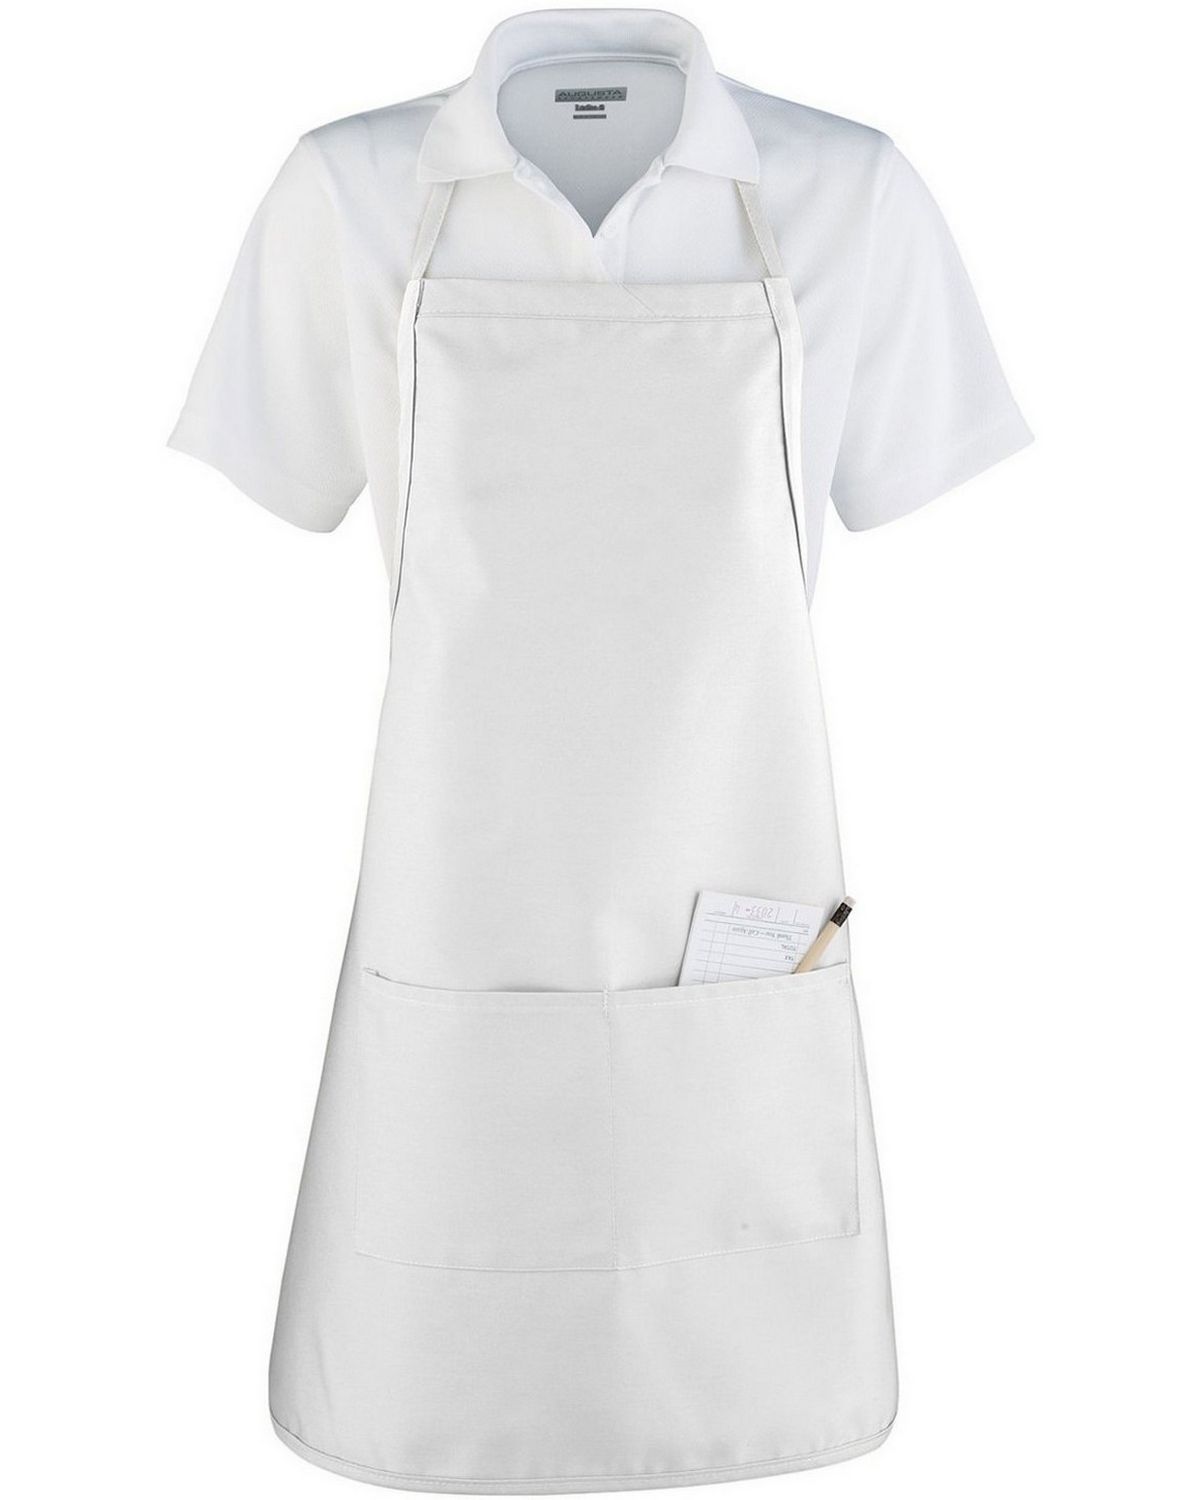 Augusta Sportswear 2300 Adult Apron with Adjustable Neck and Waist Ties